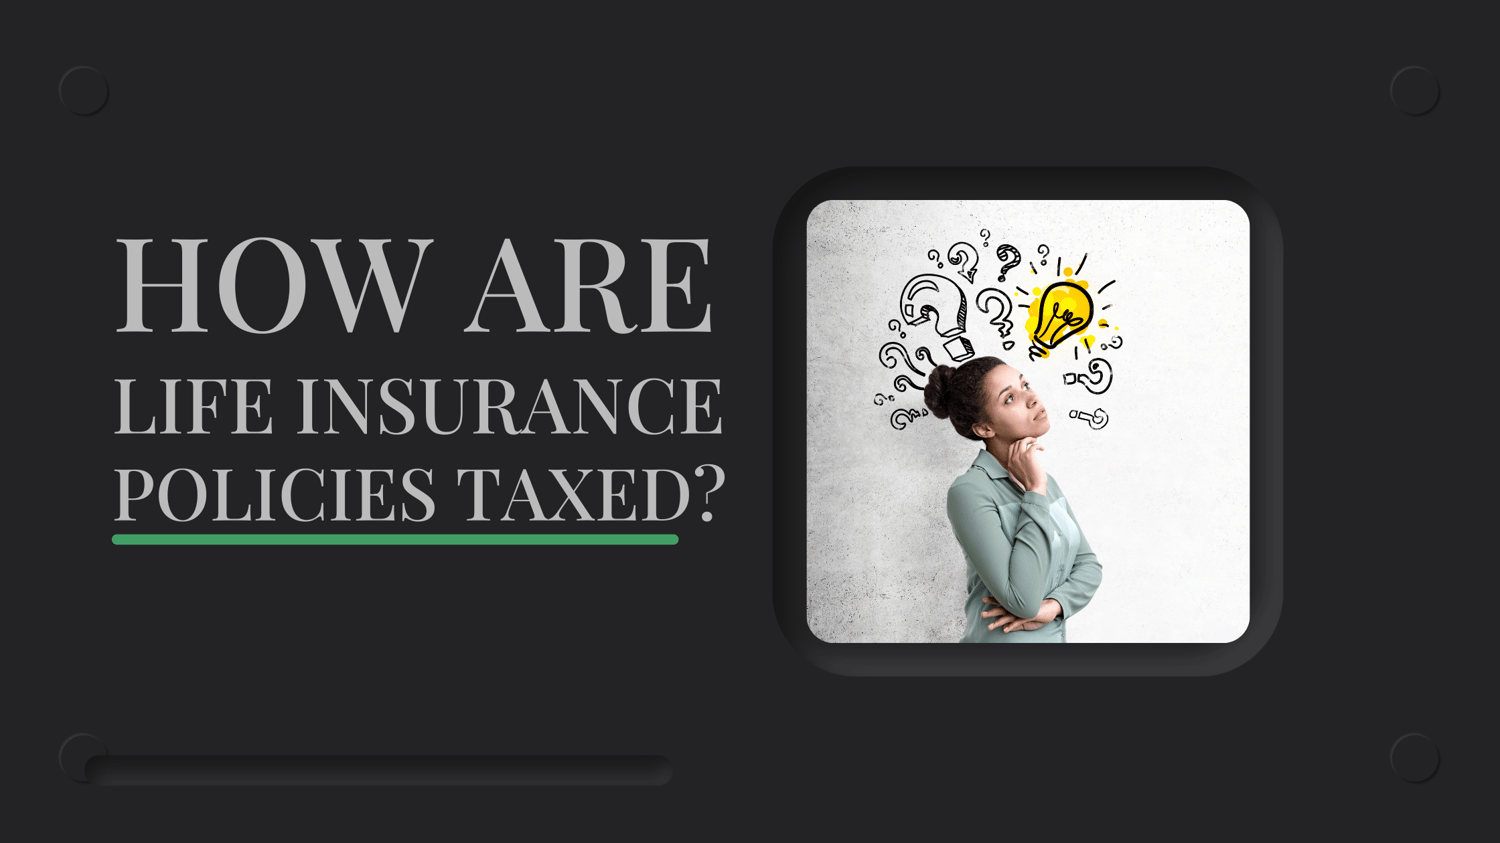 HOW ARE LIFE INSURANCE POLICIES TAXED?